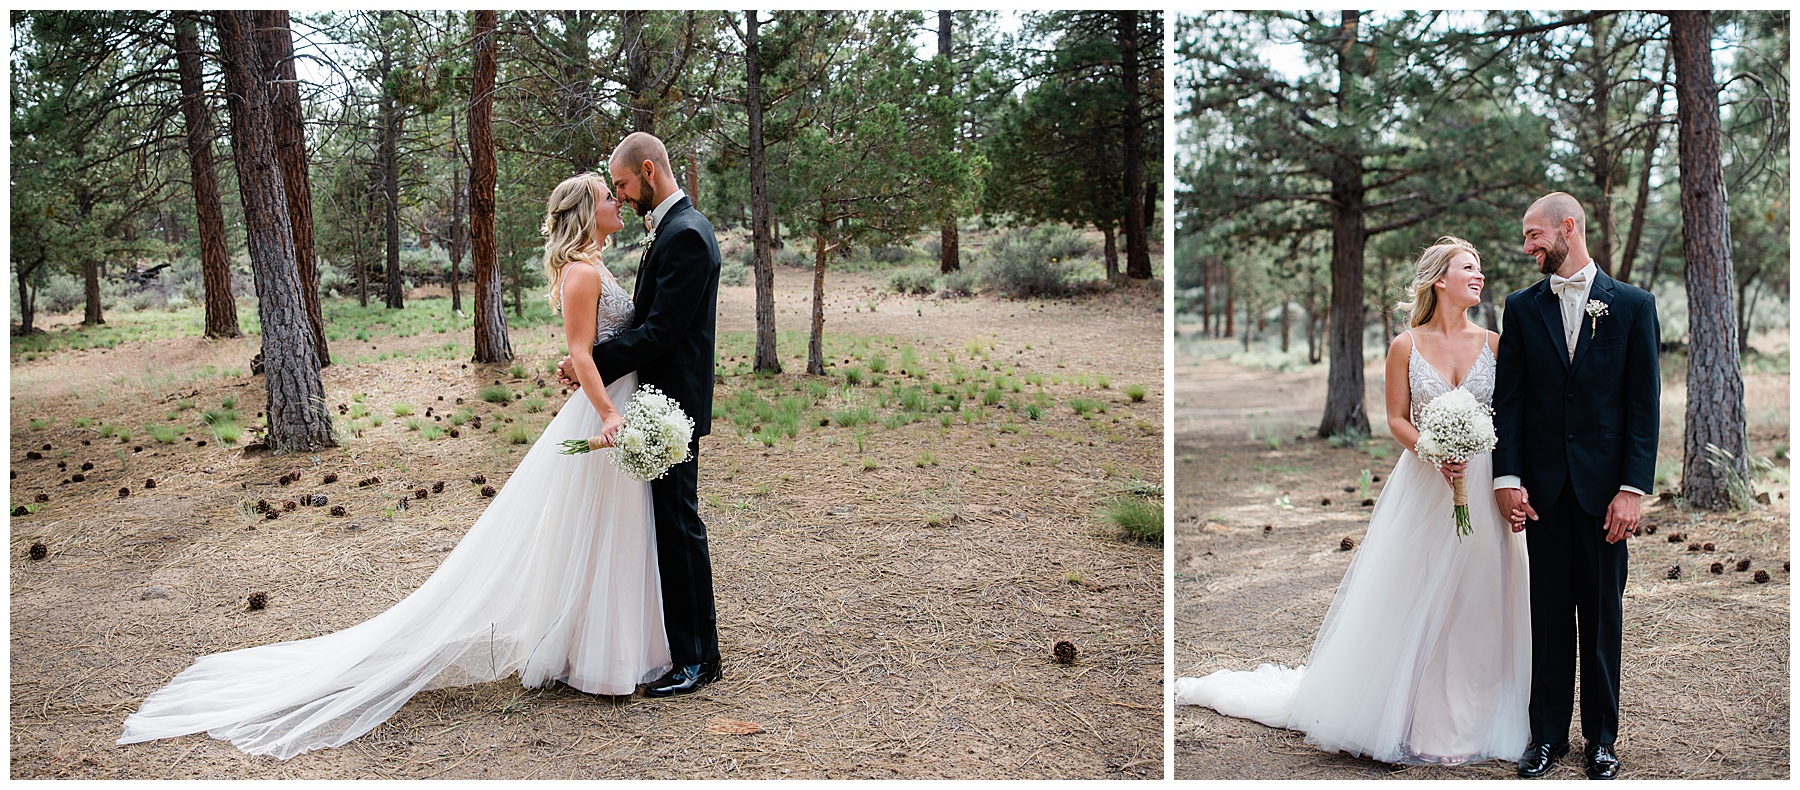 A portrait of the couple in the dessert of the intimate backyard wedding in Bend, Oregon. 